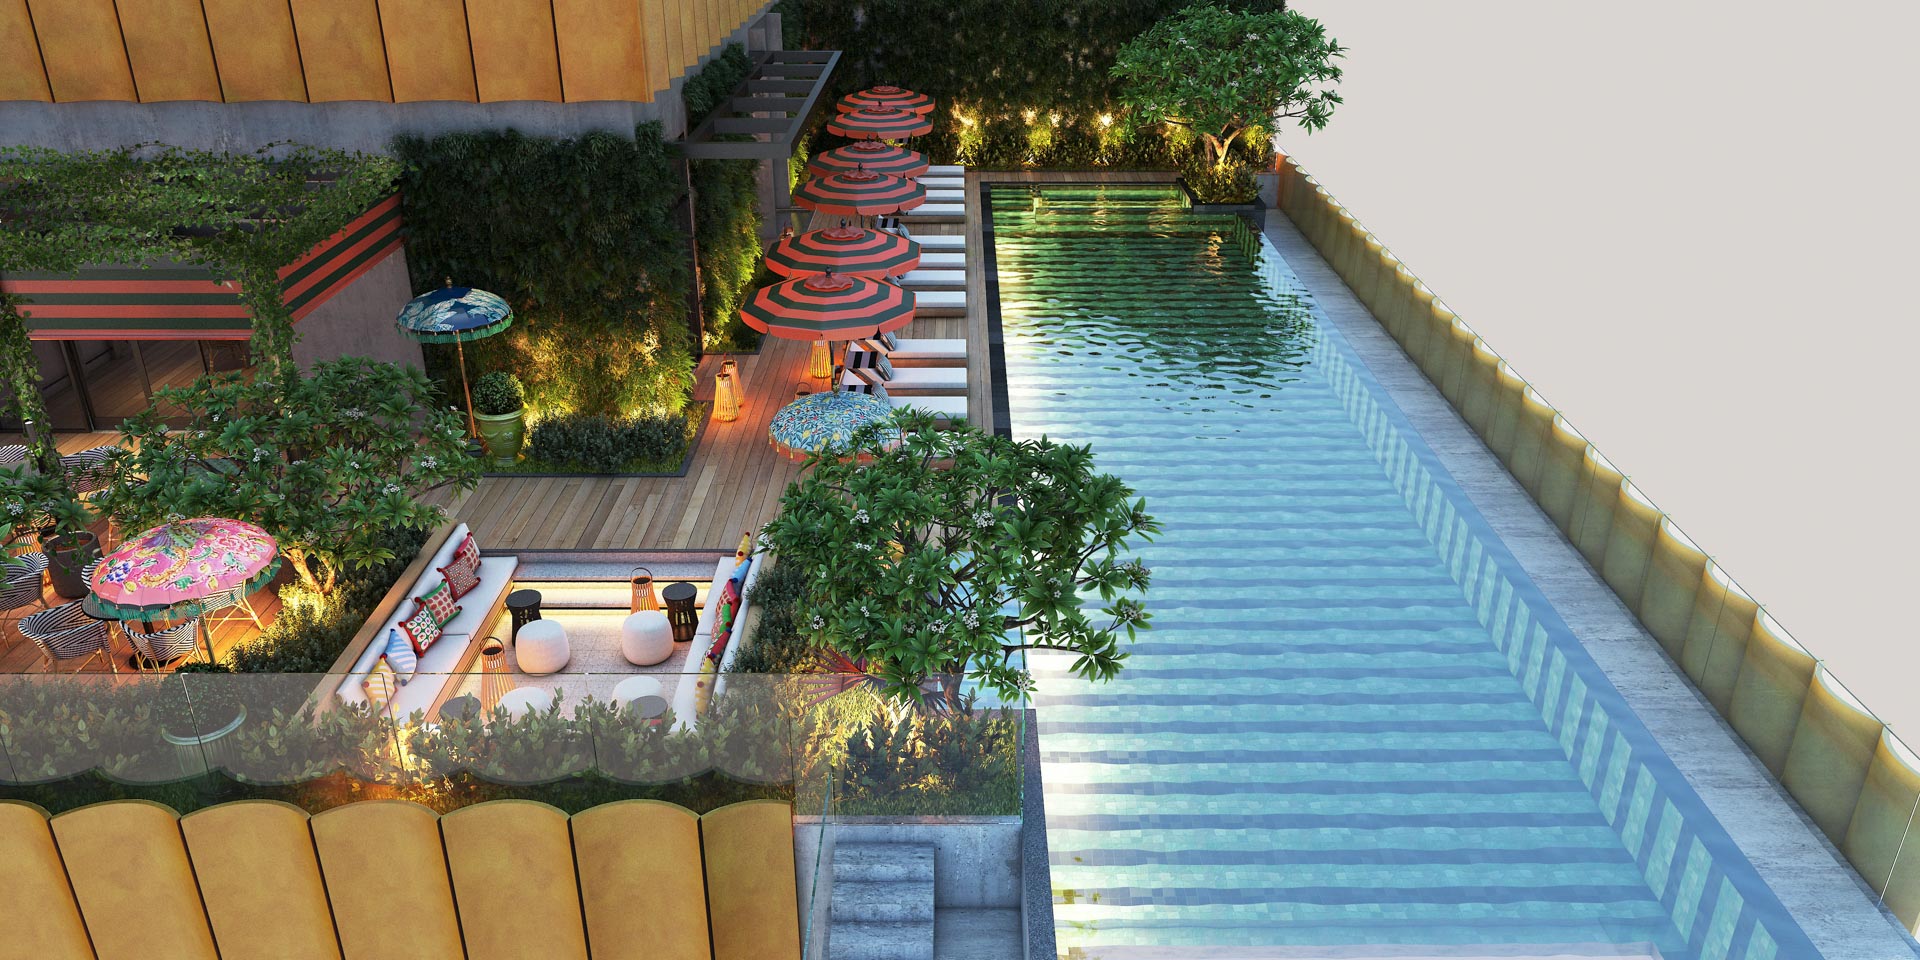 The Rooftop Garden with Pool